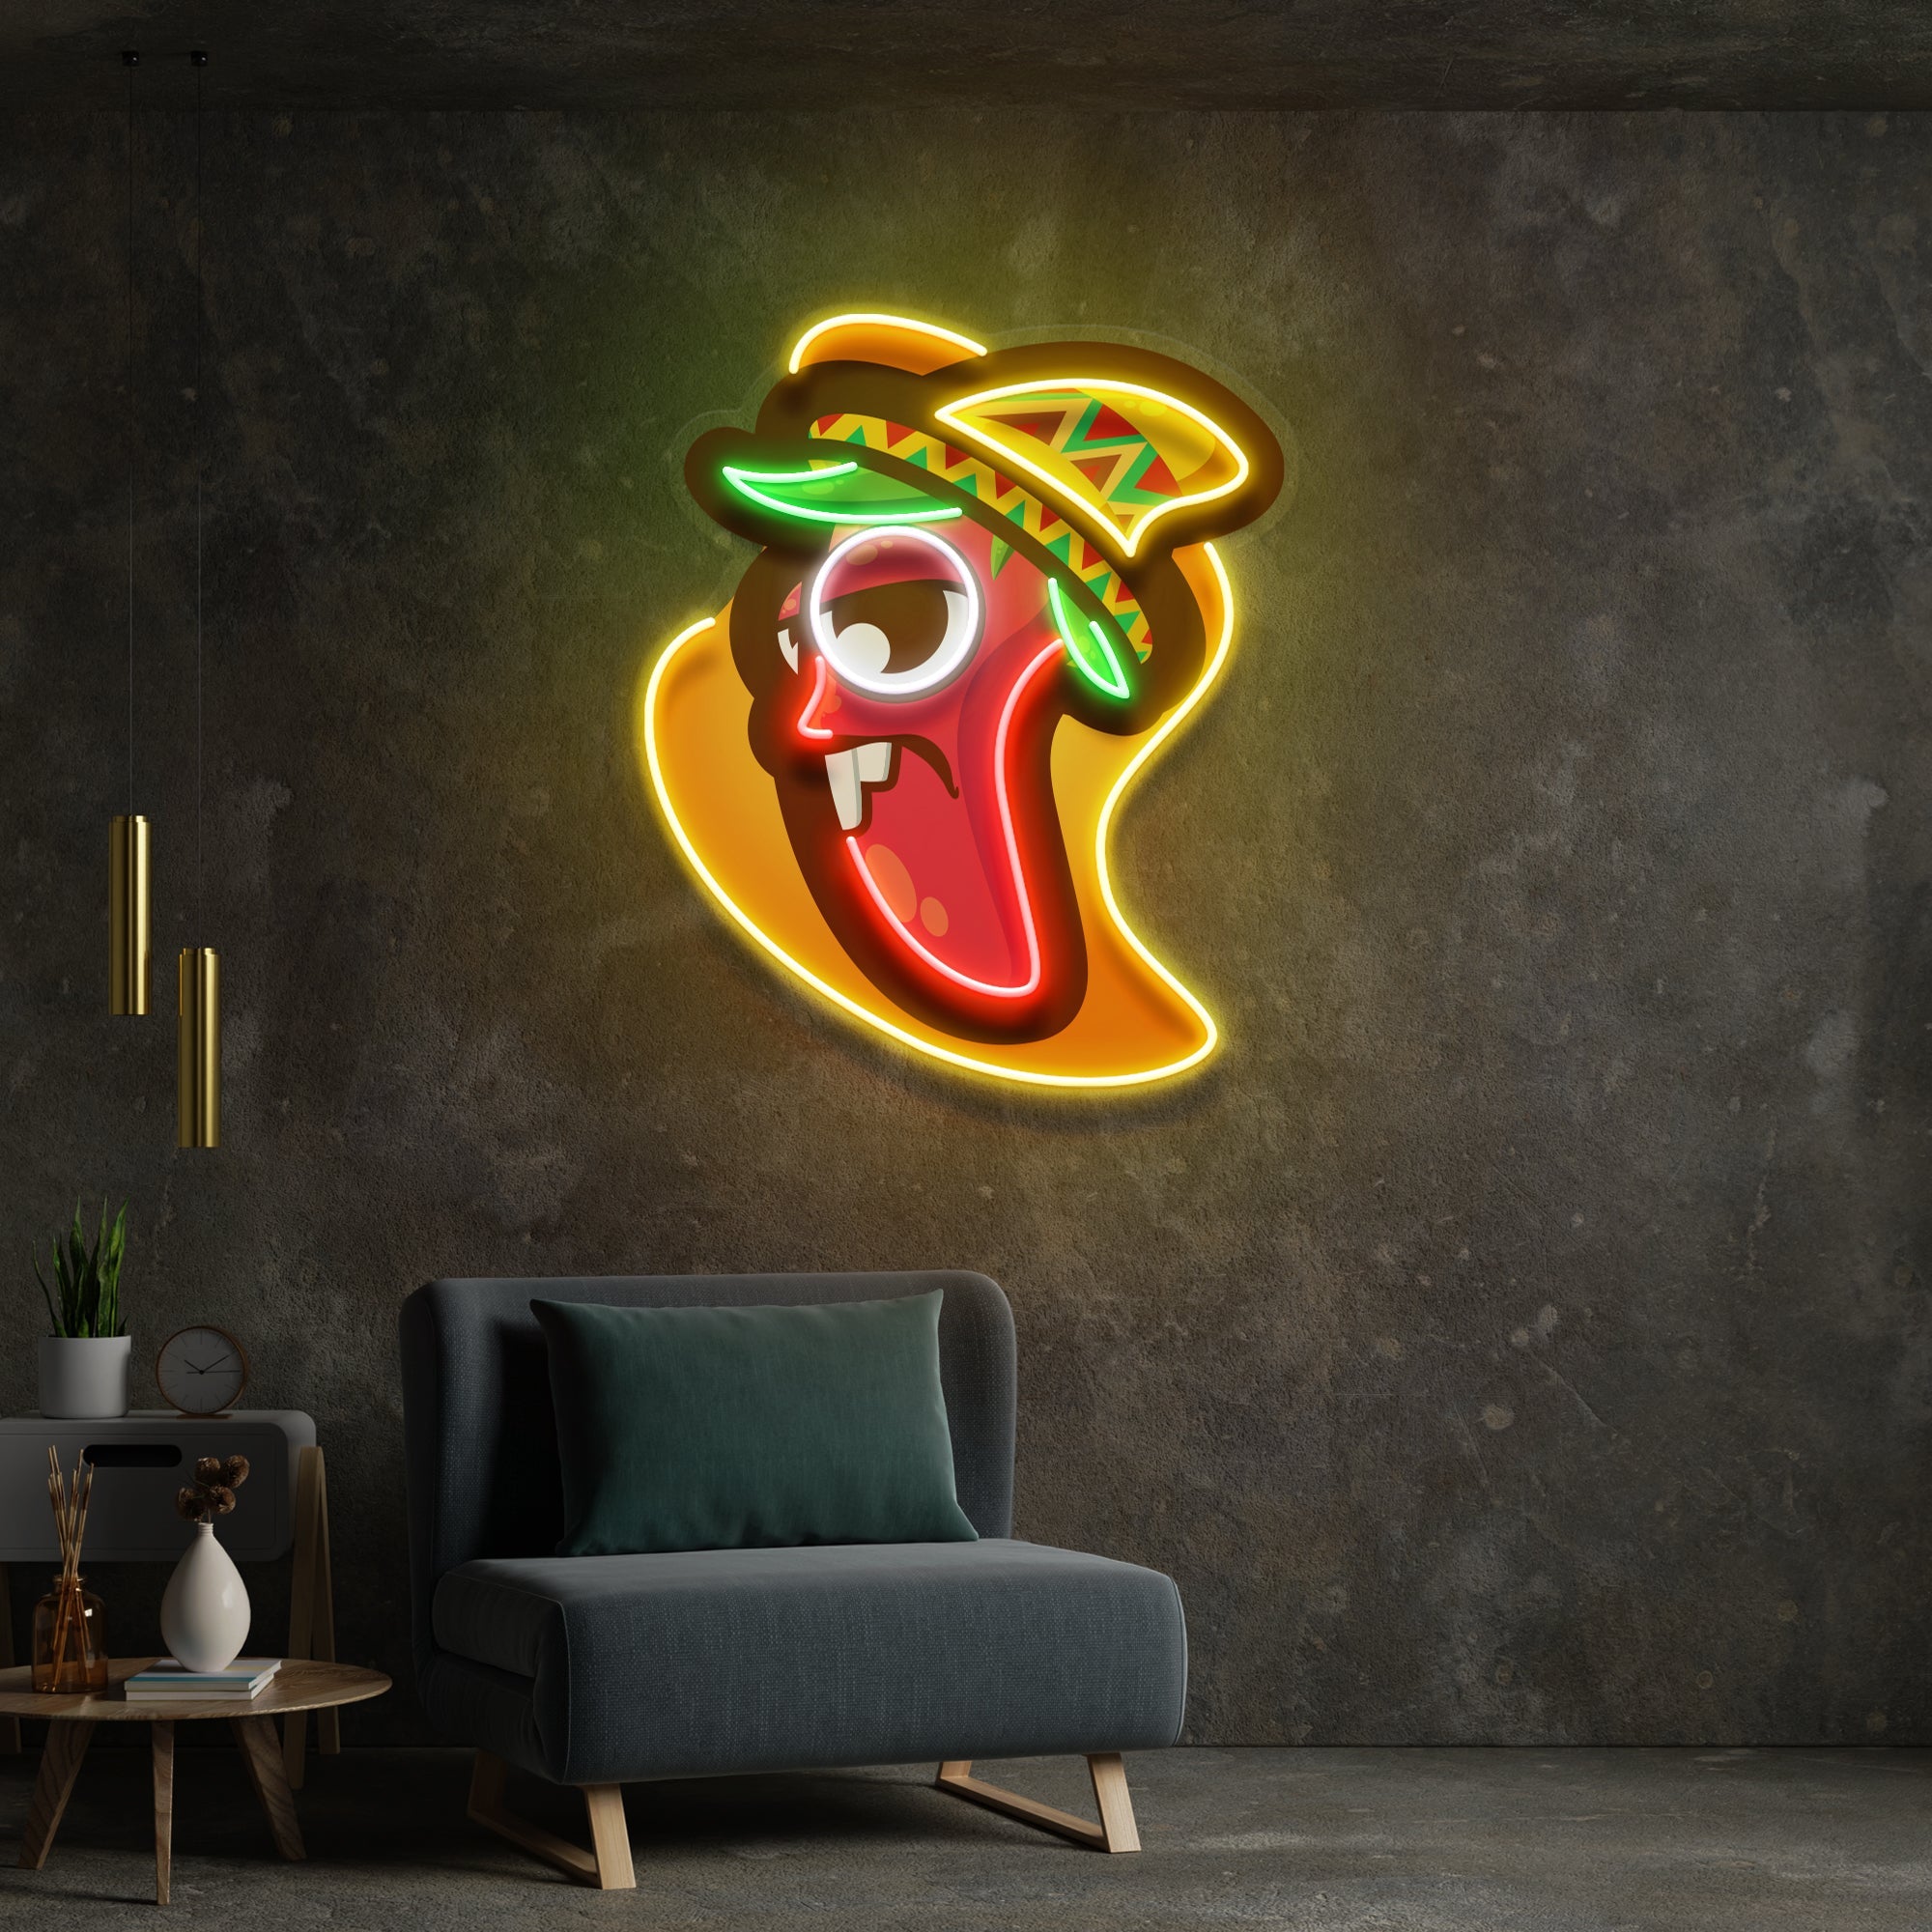 Cartoon Mexican Chili Peppers Artwork Led Neon Sign Light - Neonbir